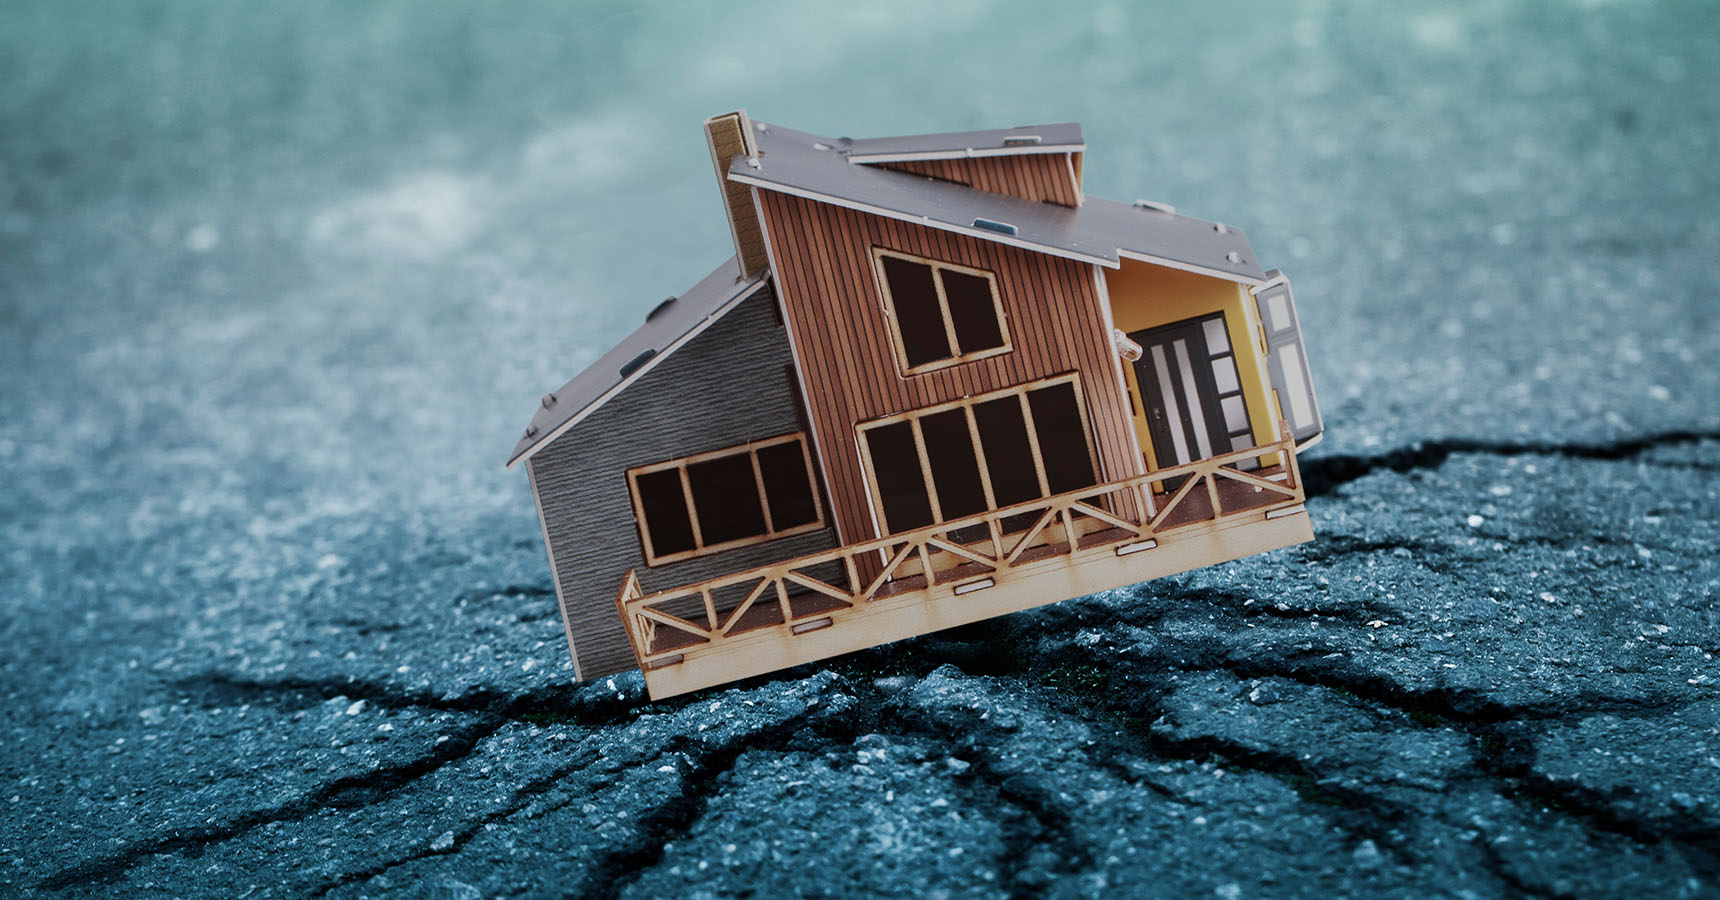 A small brown wooden model of a house sits on cracked concrete